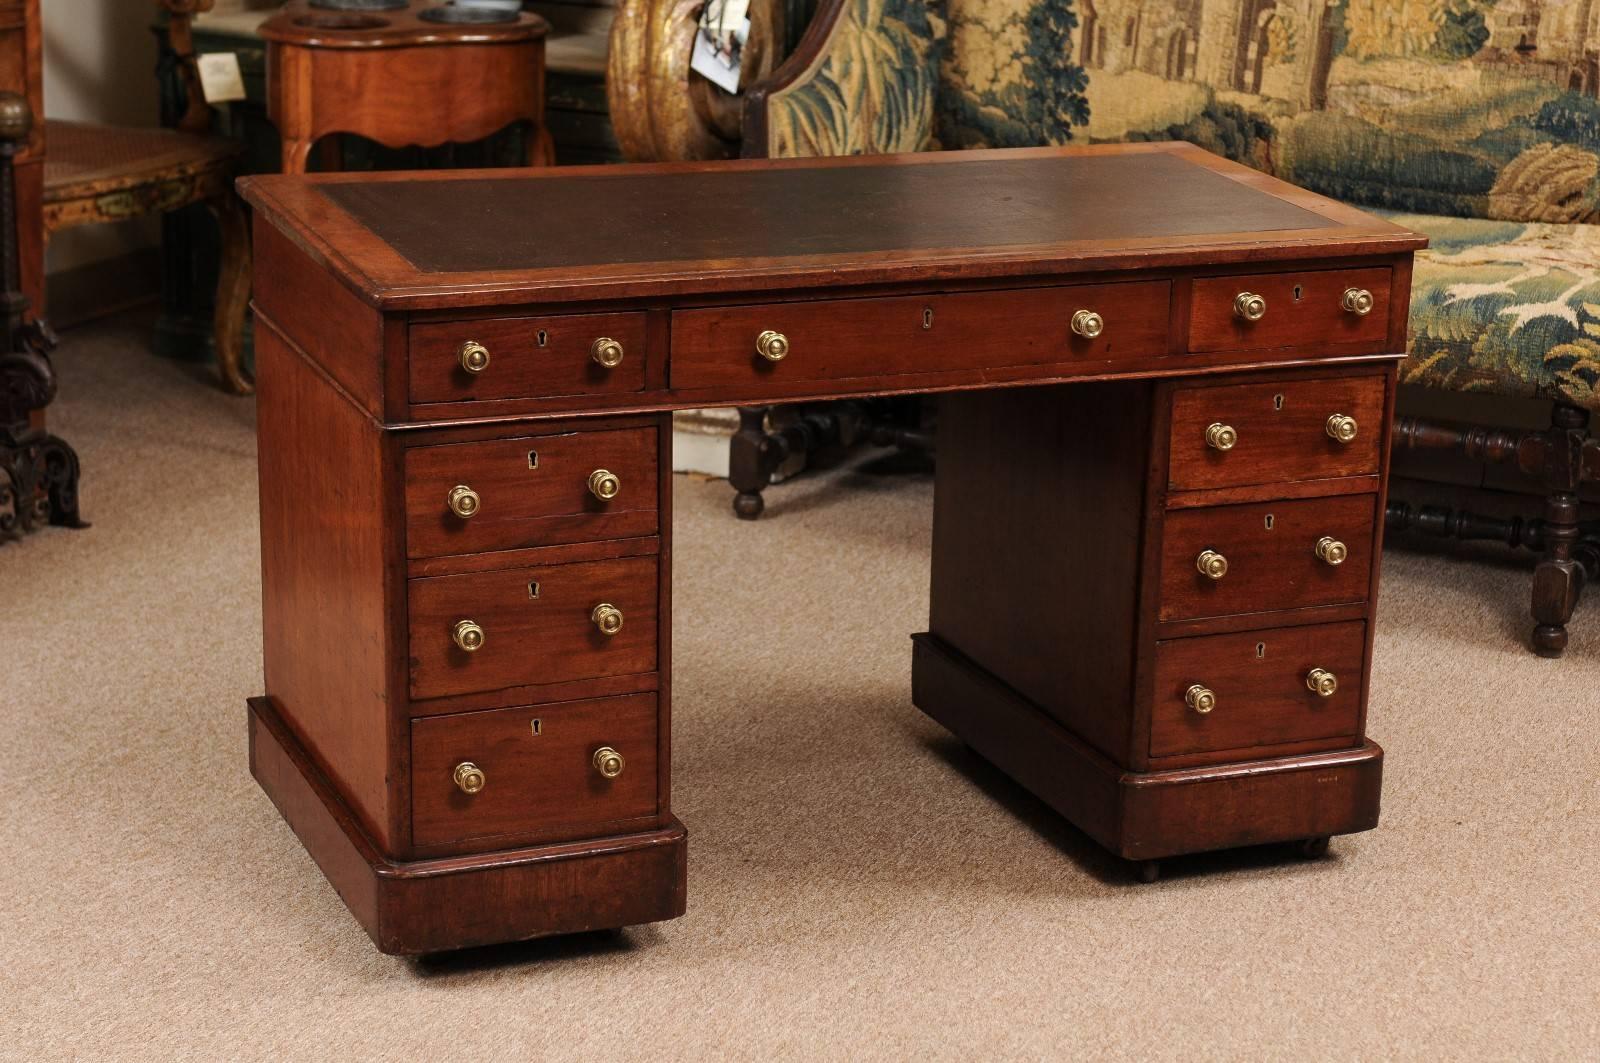 Mid-19th century English Kneehole desk in mahogany with leather top & 8 drawers.